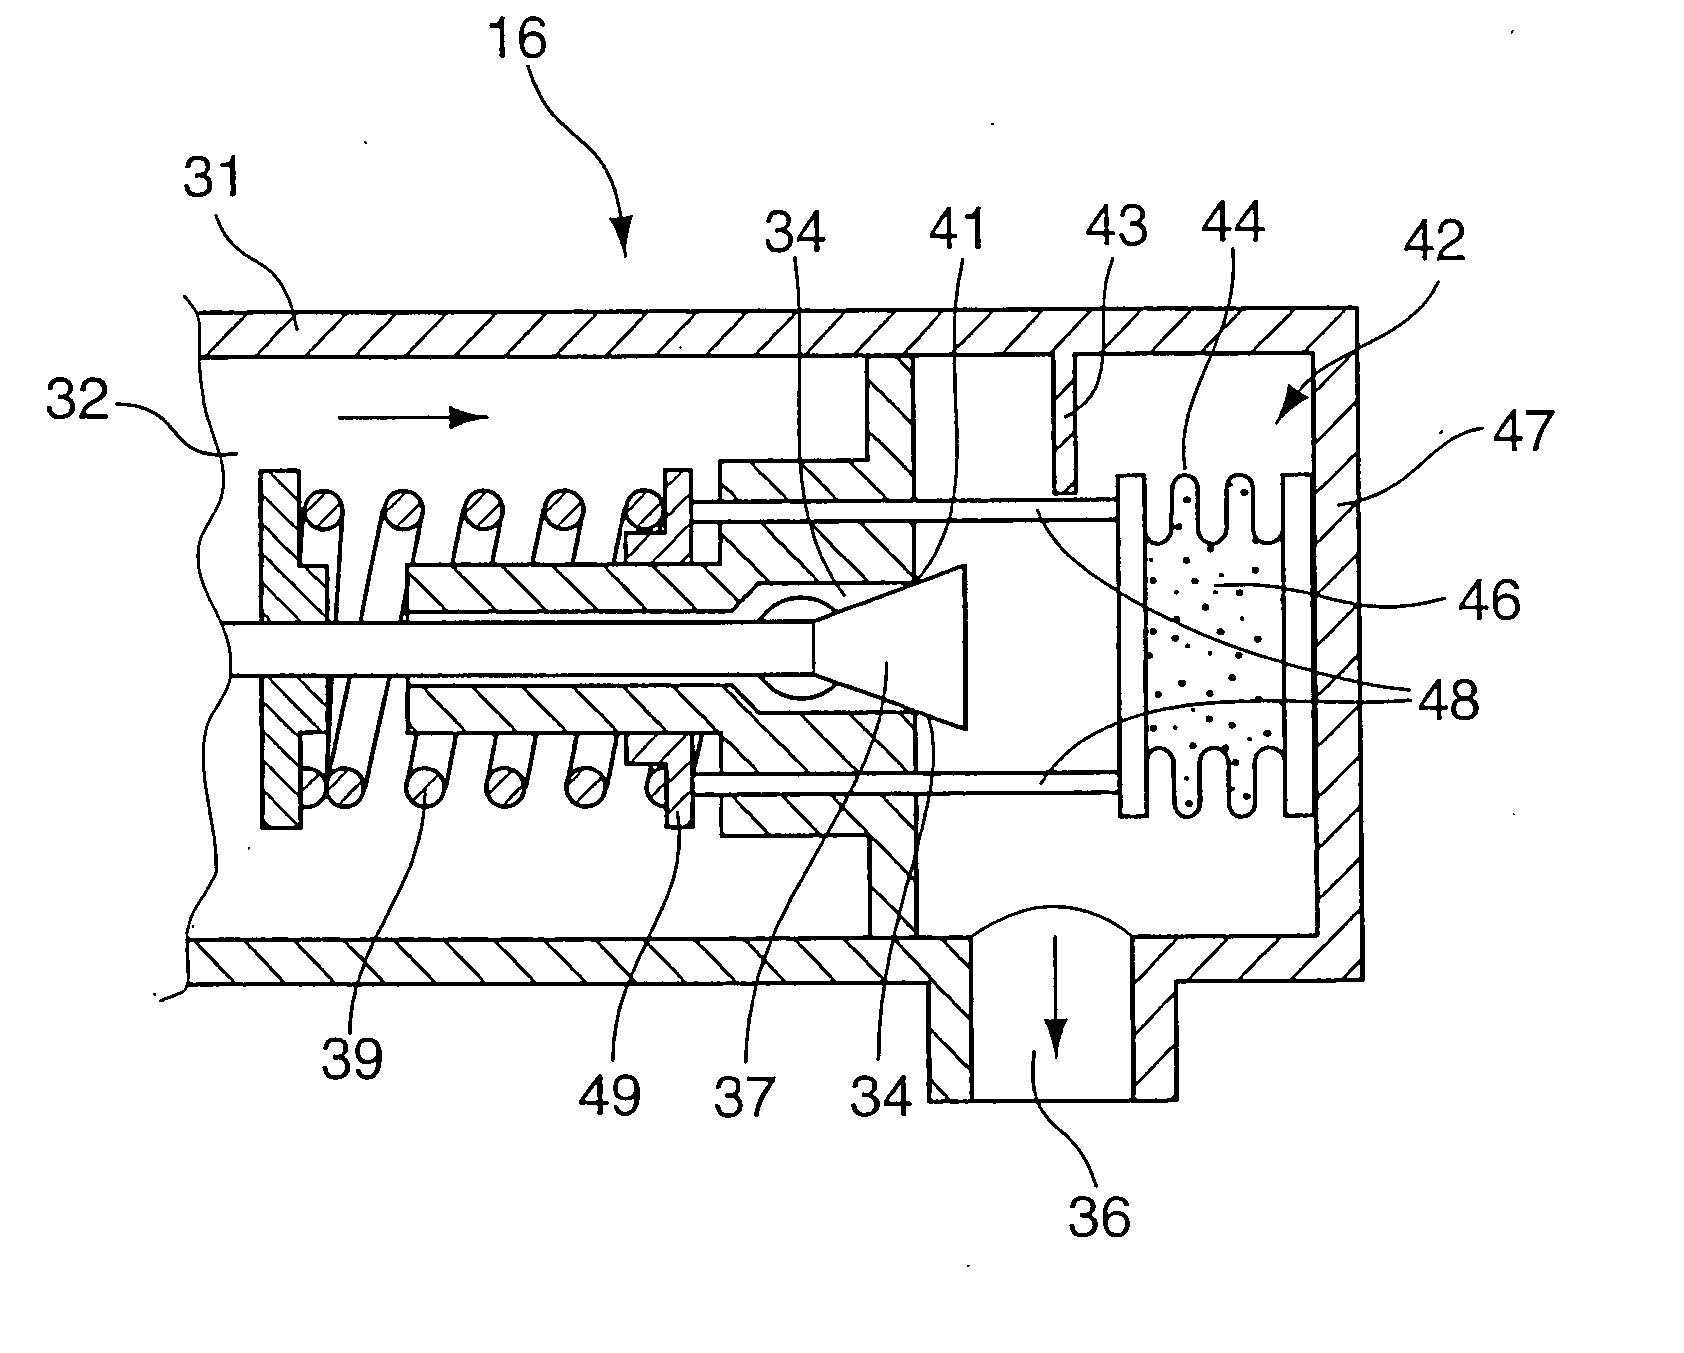 Method for controlling an expansion valve and expansion valve, in particular for vehicle air-conditioning systems operated with CO2 as the refrigerant